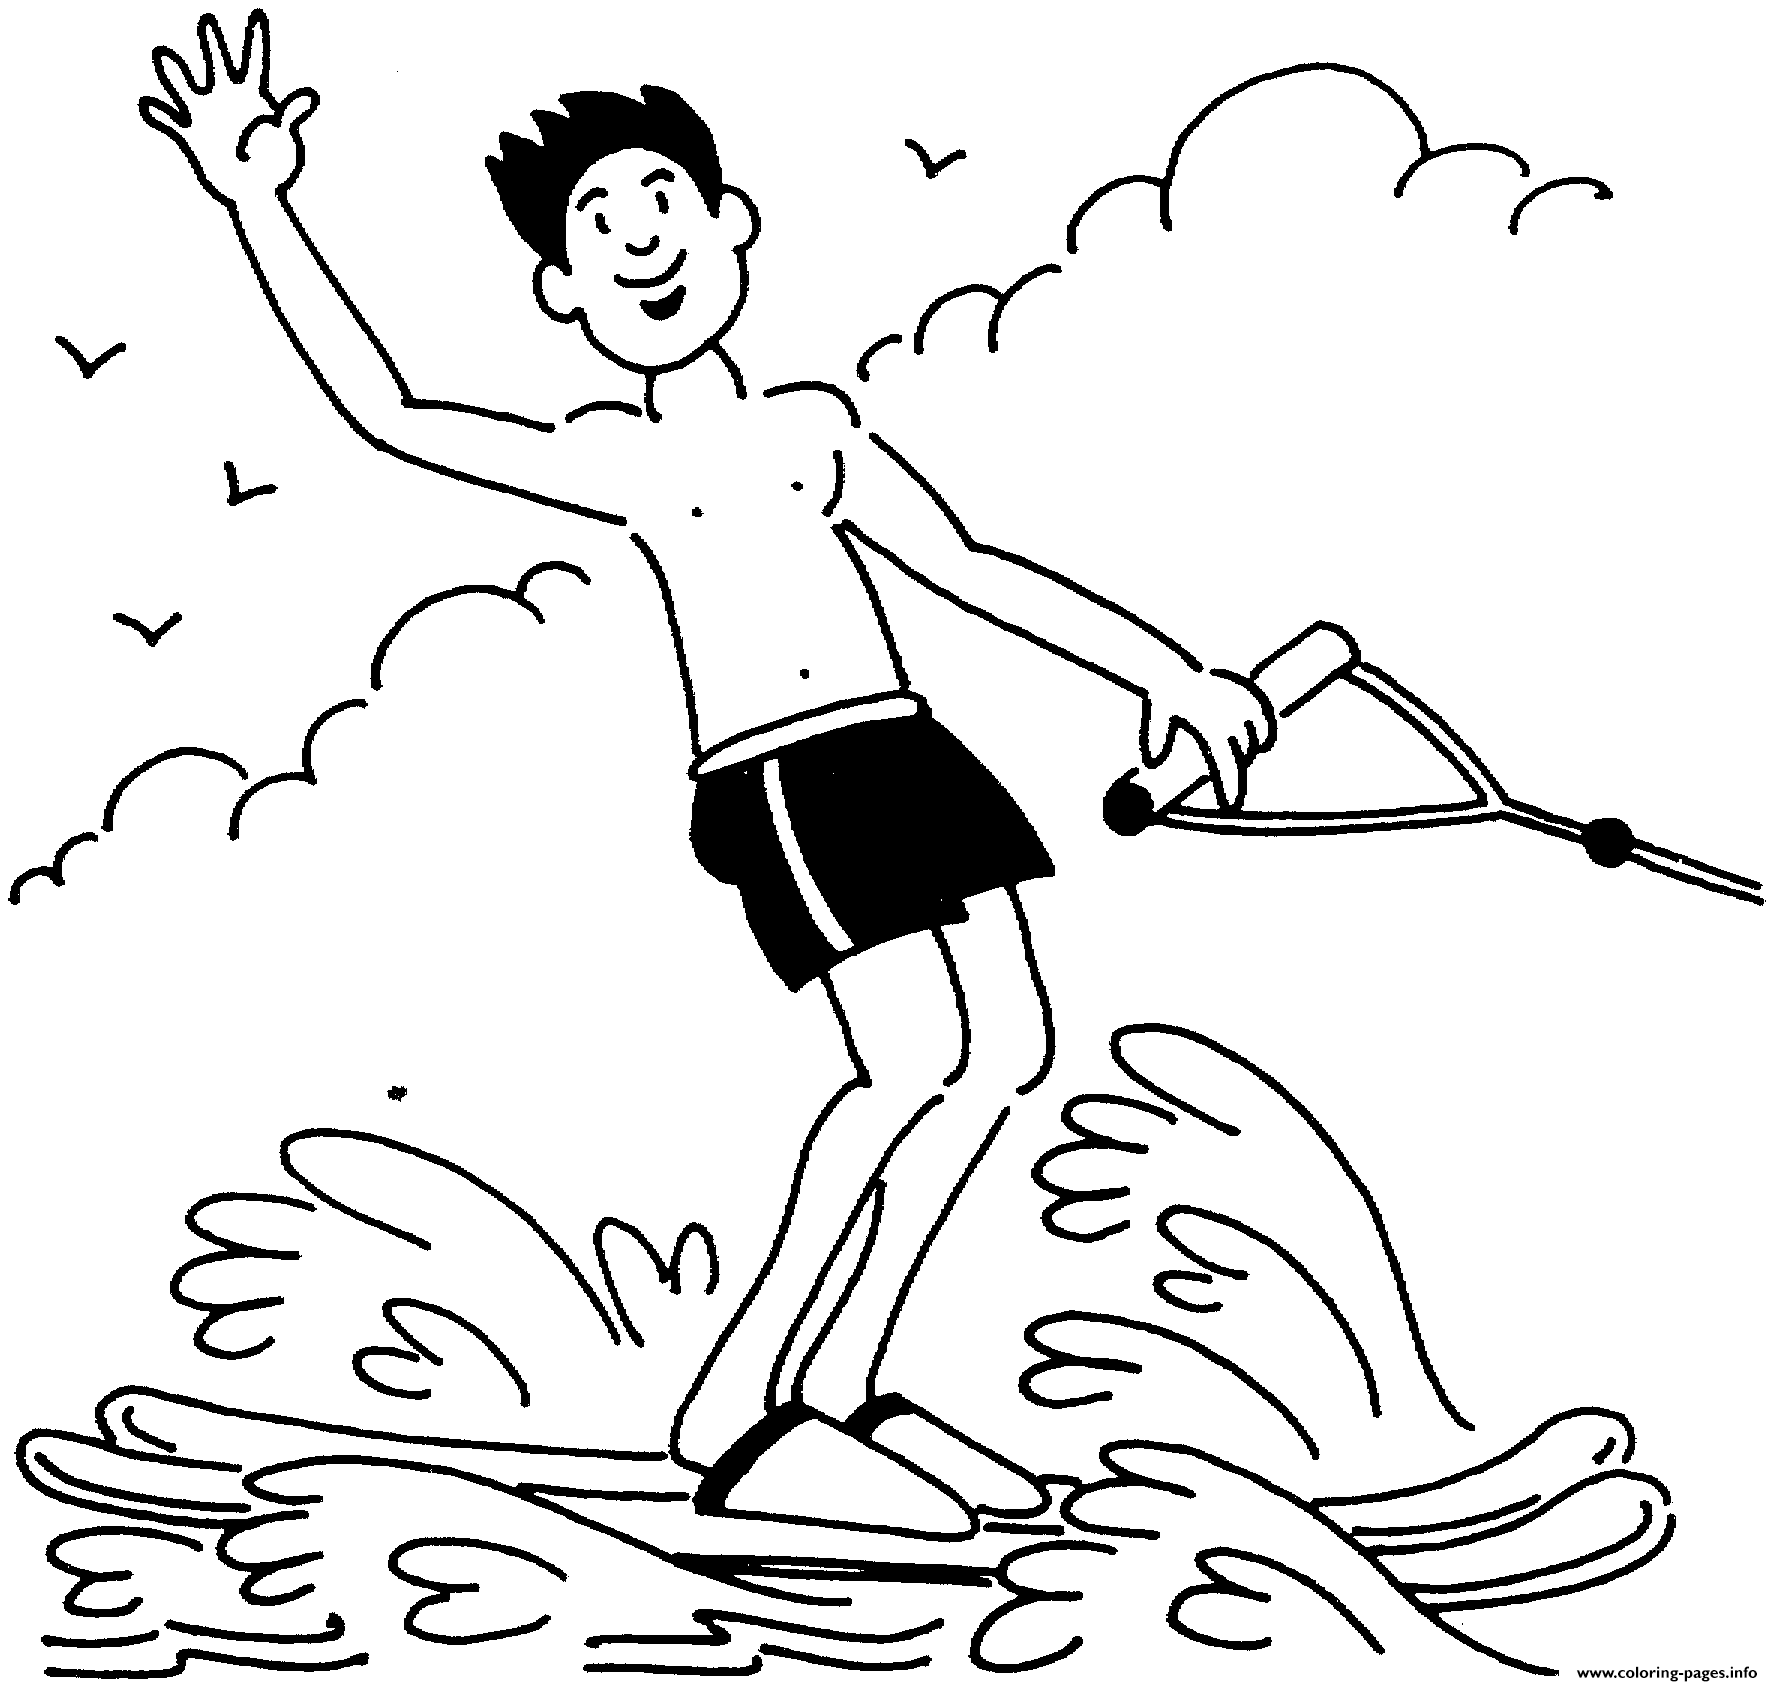 Water Ski Coloring Page3bcf Coloring Pages Printable